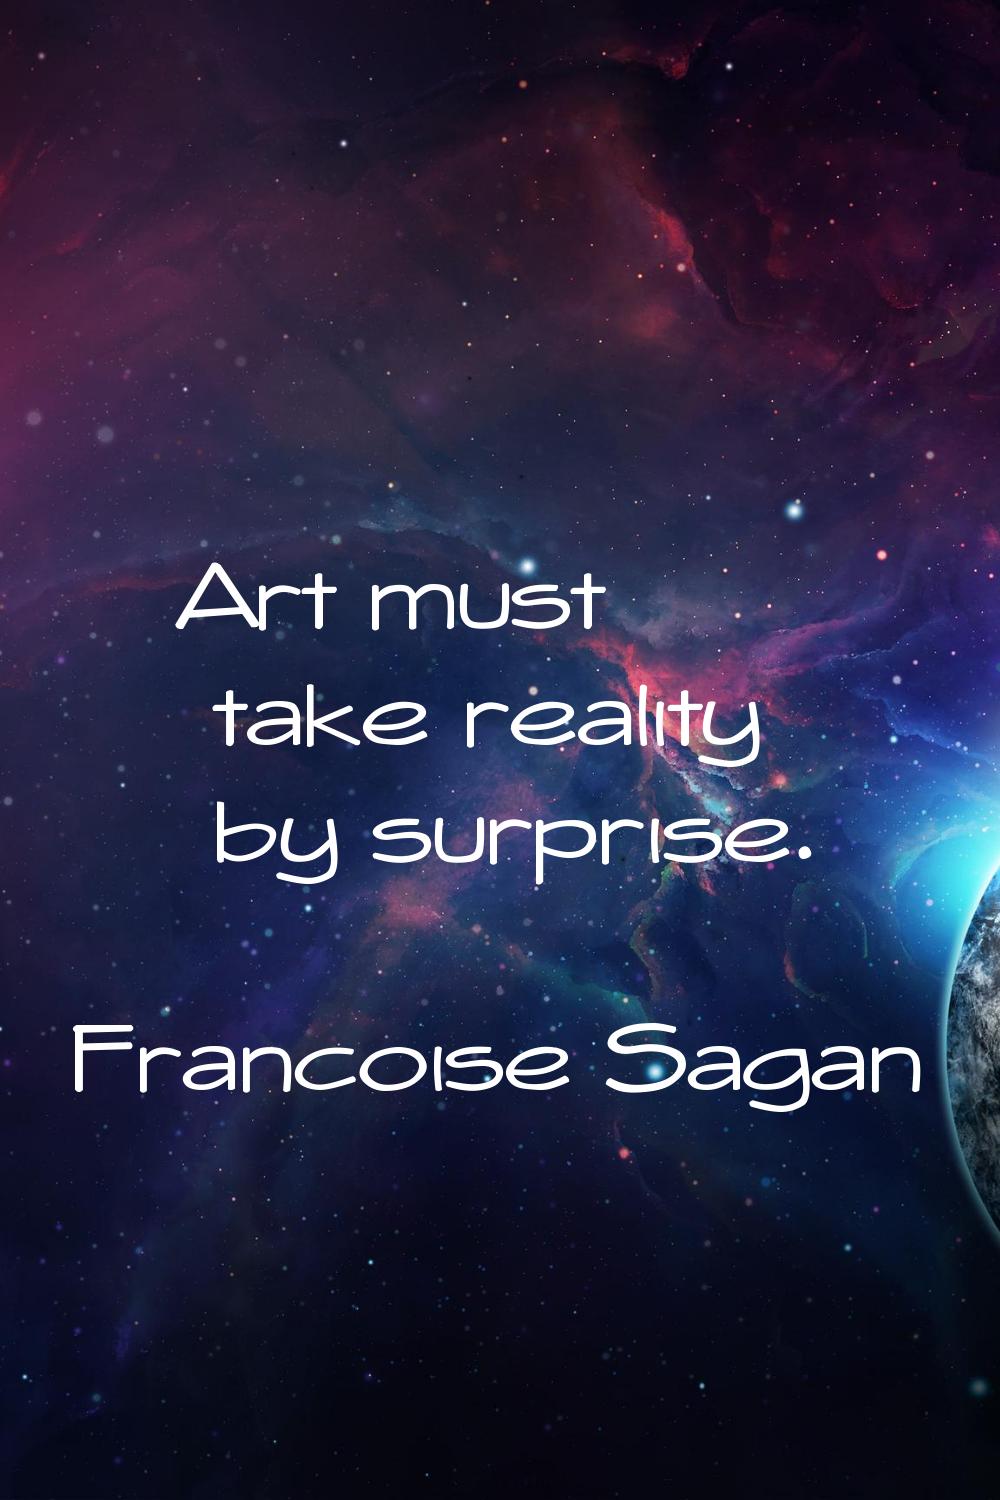 Art must take reality by surprise.